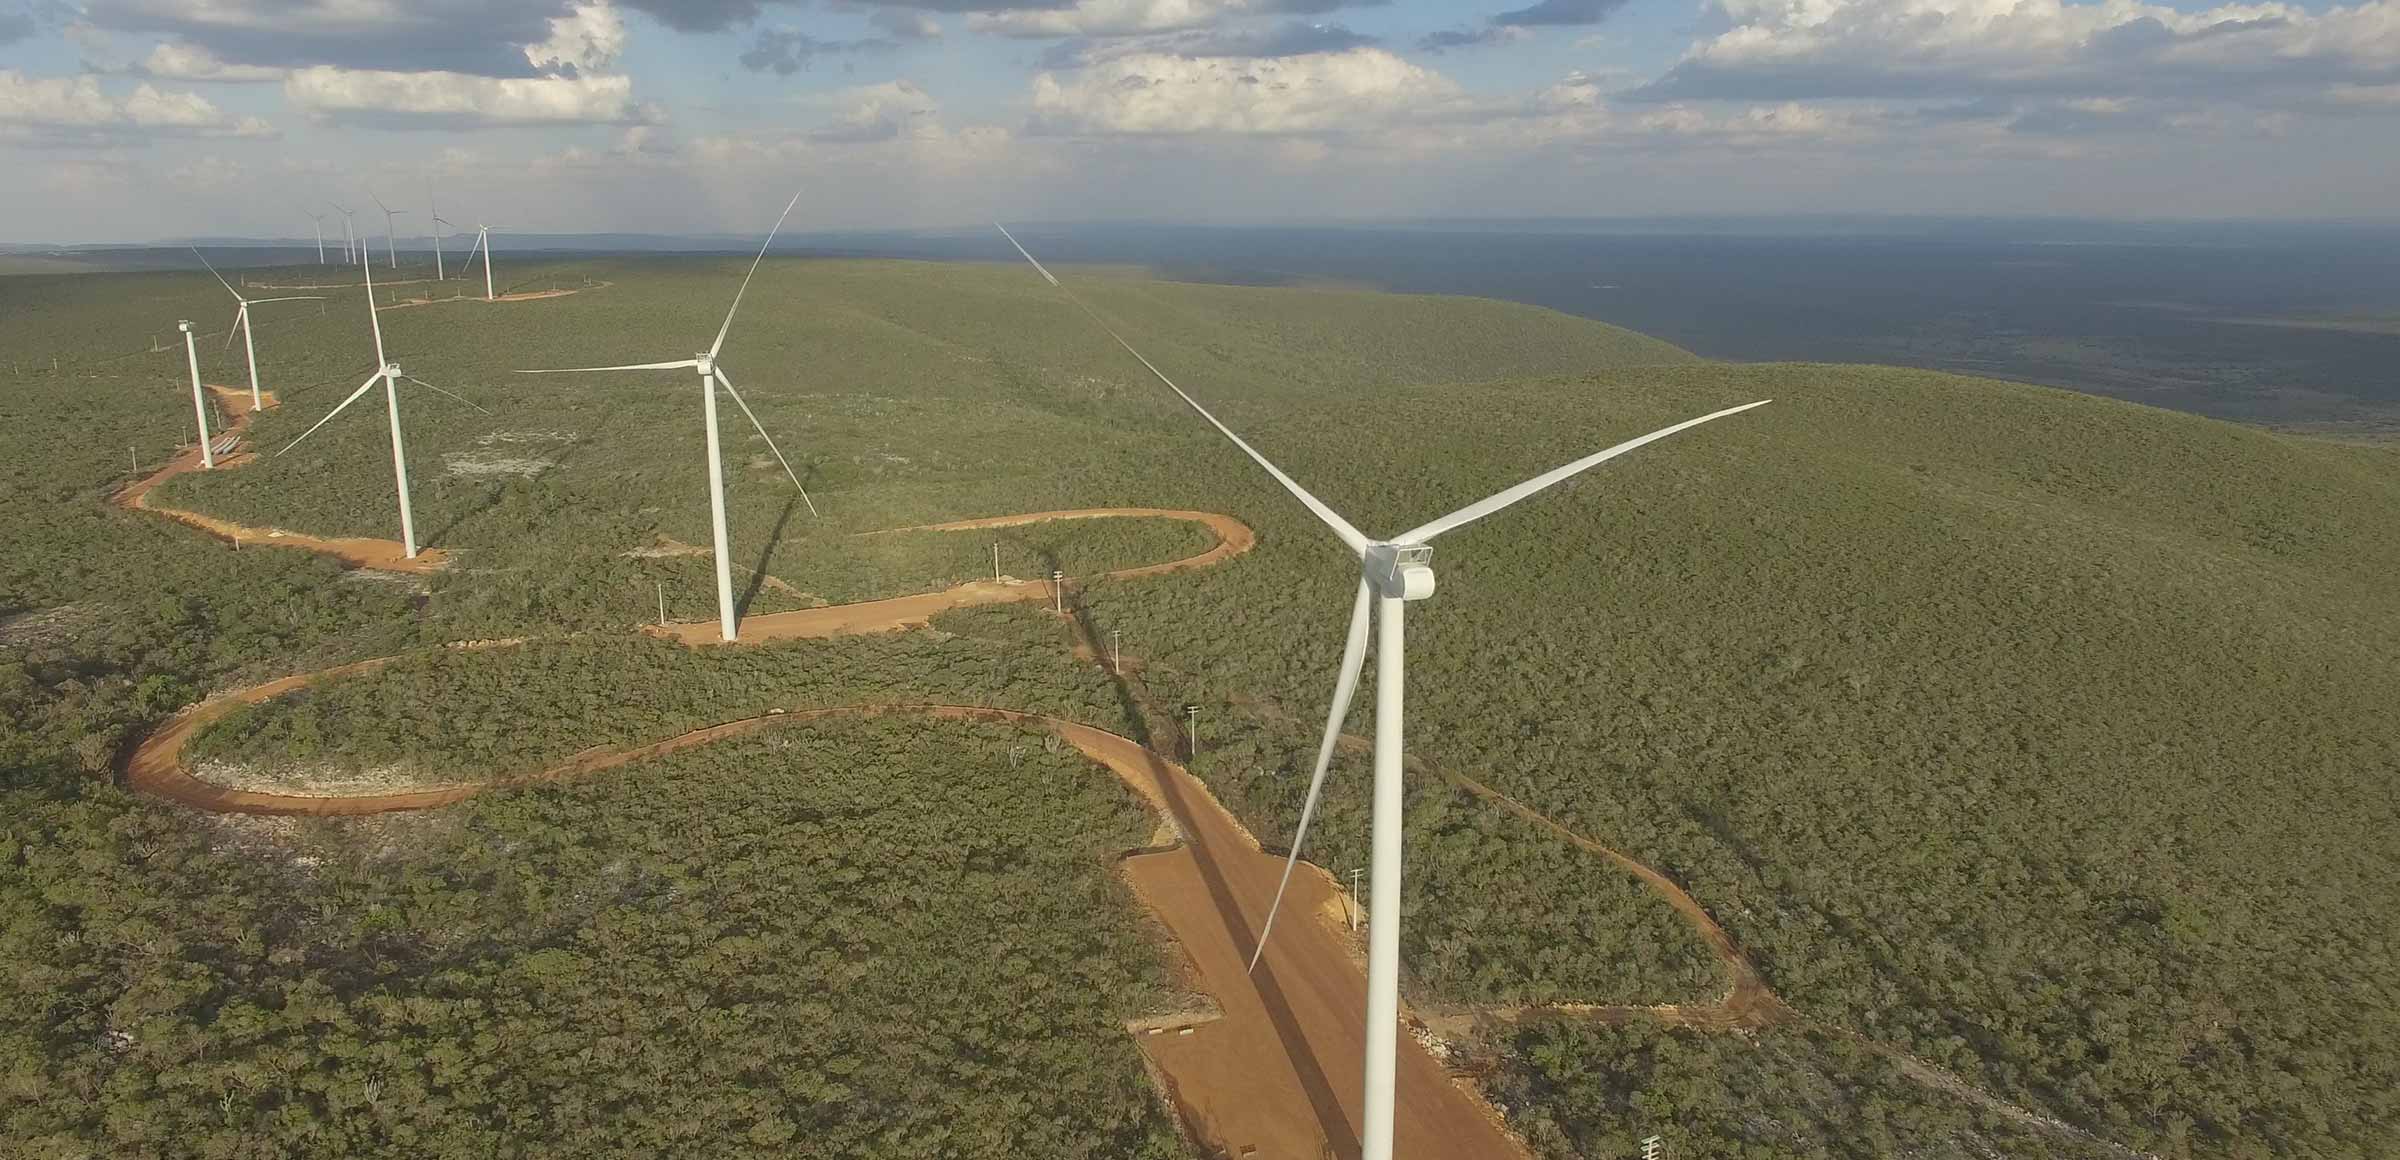 This Noise That Never Stops': Wind Farms Come to Brazil's Atlantic